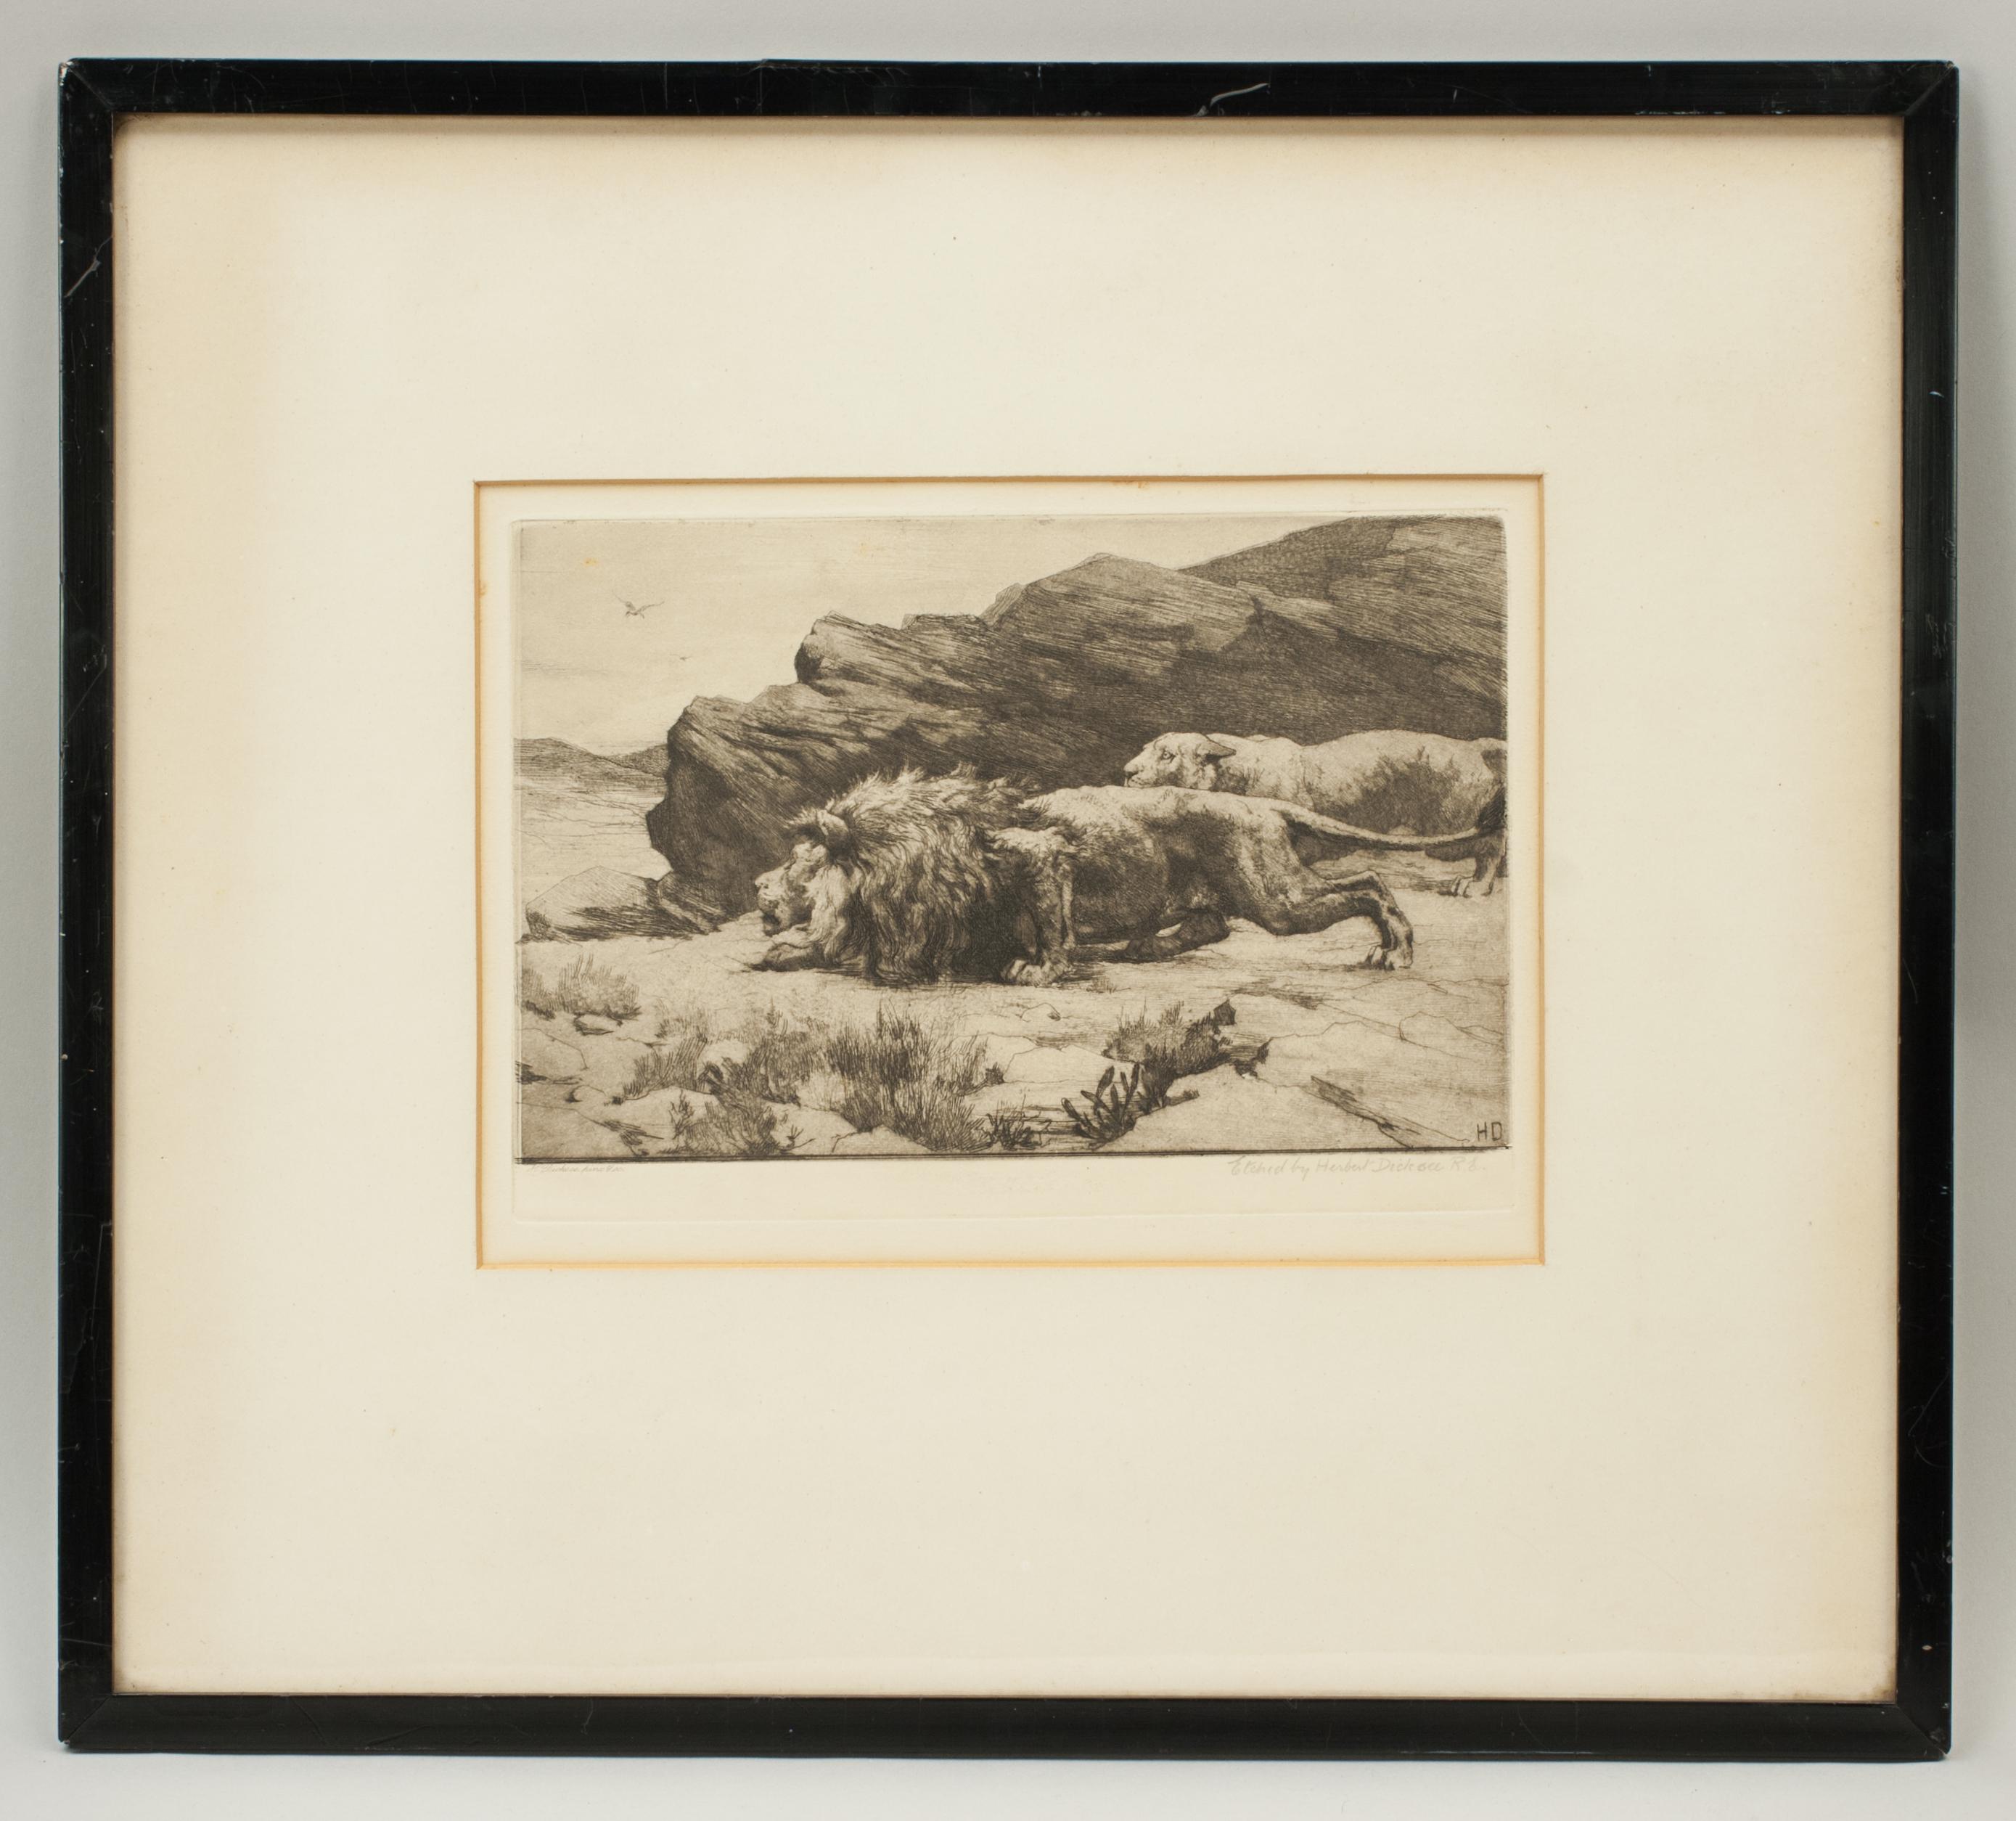 Marauders, antique etching by Herbert Dicksee.
A wonderful framed etching by Herbert Dicksee of a lion and lioness, Marauders. The black and white wildlife picture shows a lion and lioness crouching behind some rocks, very similar to another of